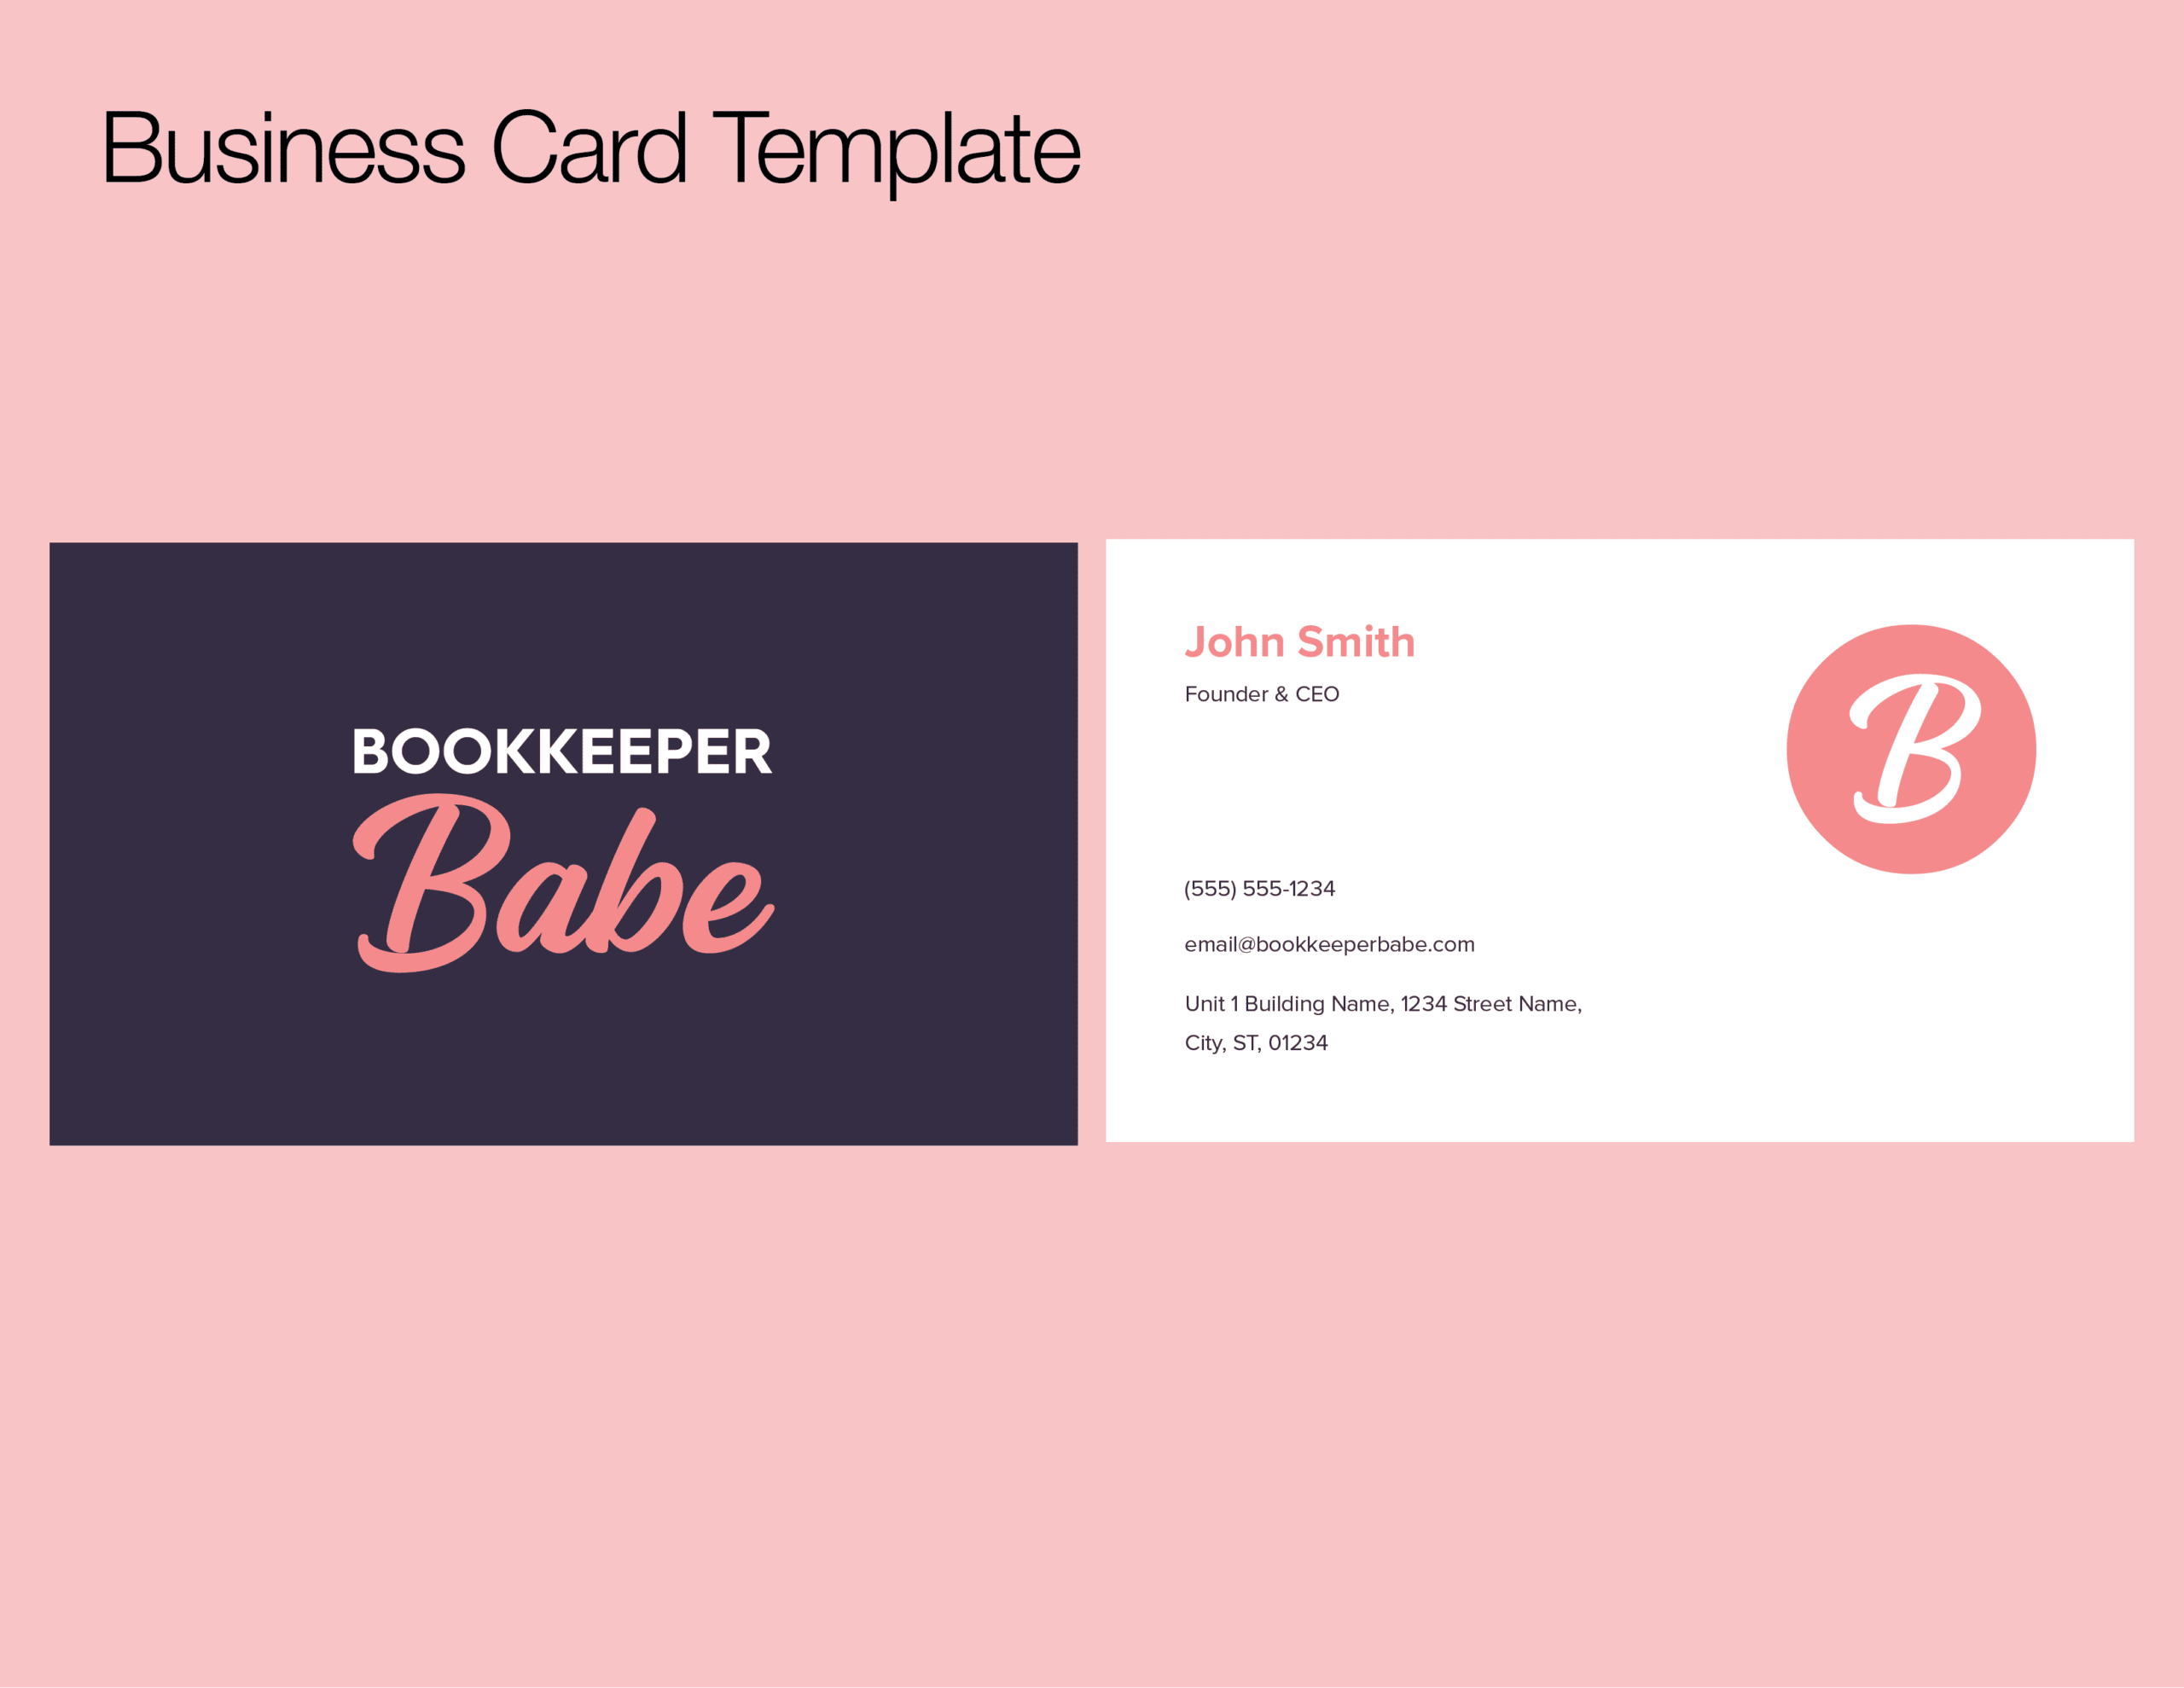 04 - BKBABE_BUSINESS_CARD_TEMPLATE